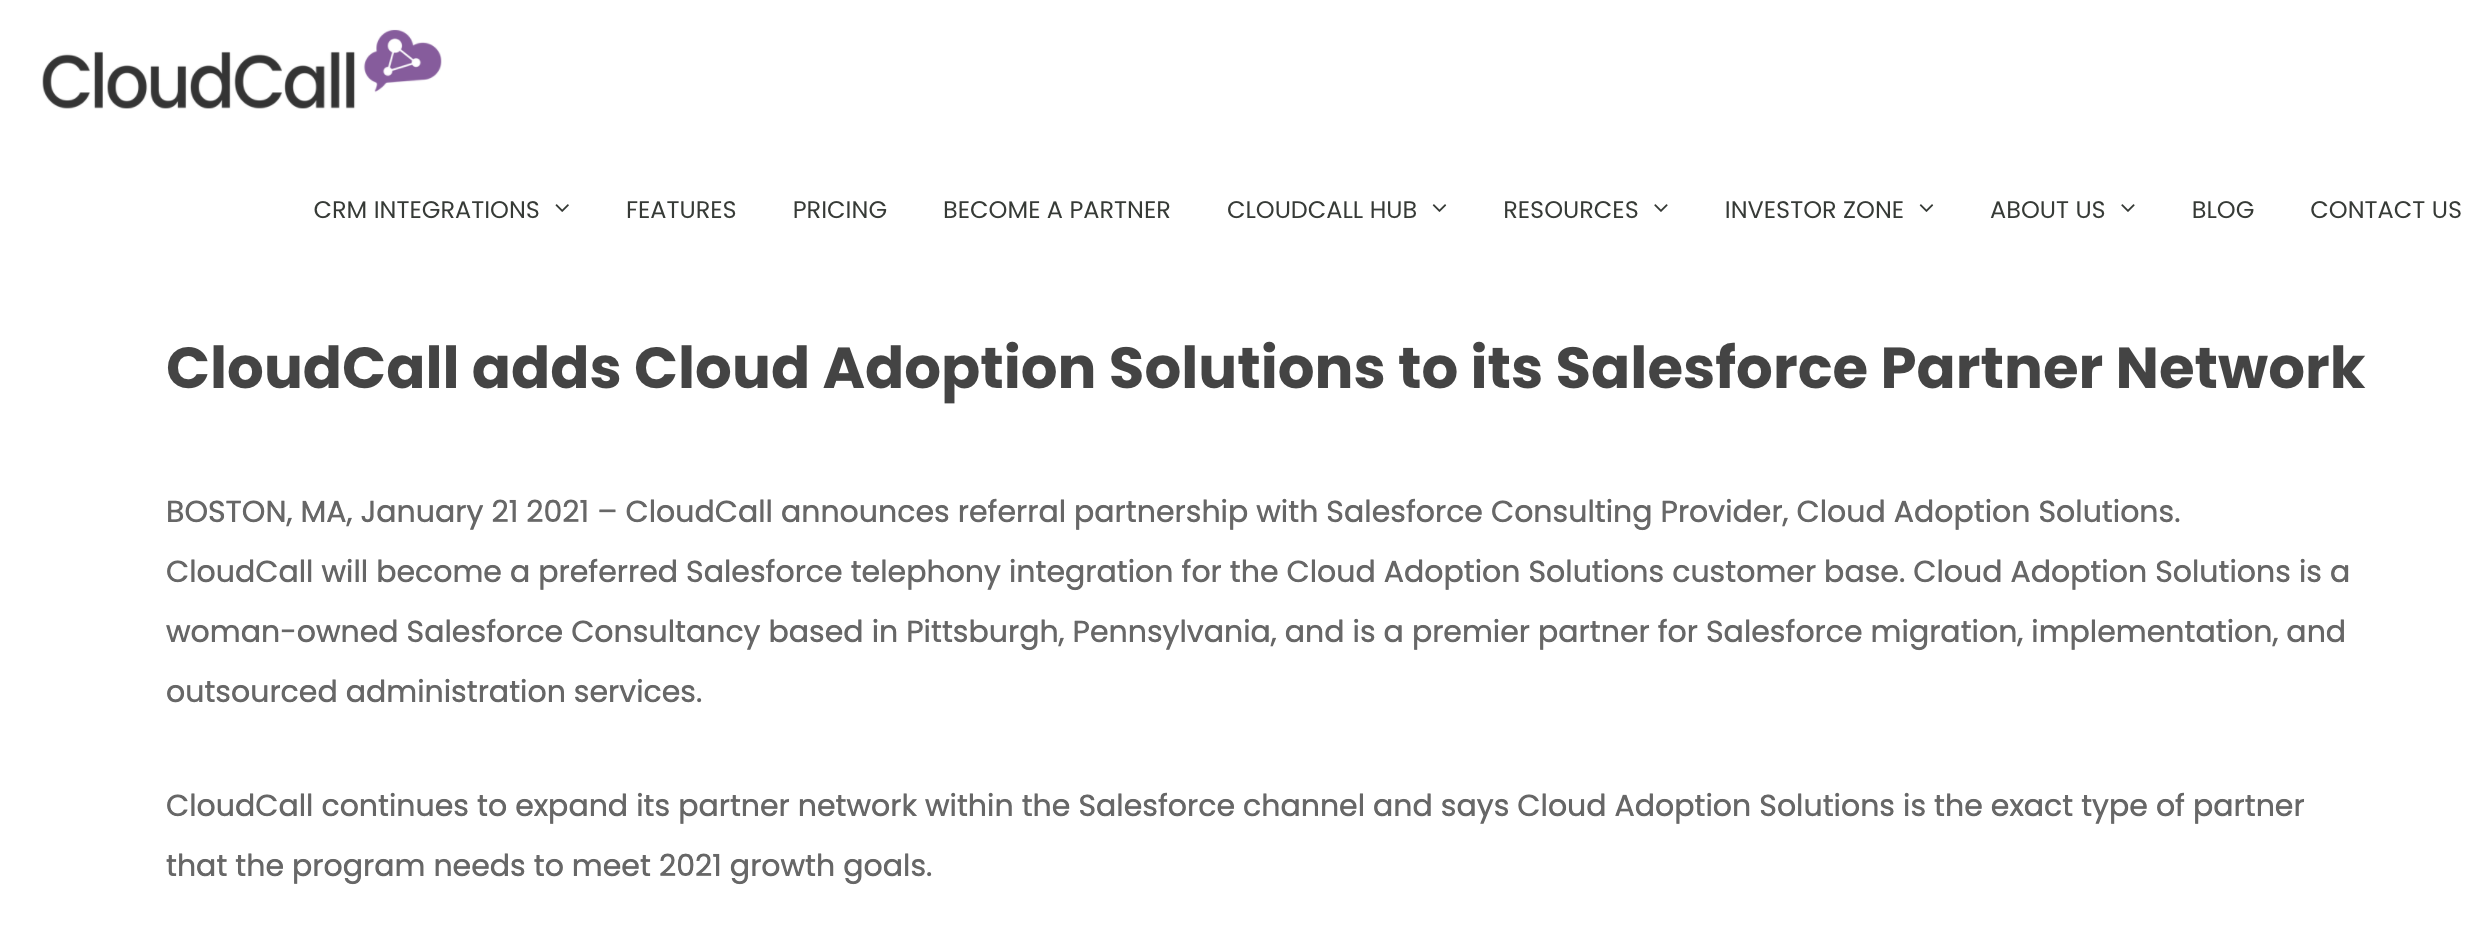 Cloud Call adds Cloud Adoption Solutions to Partner Network